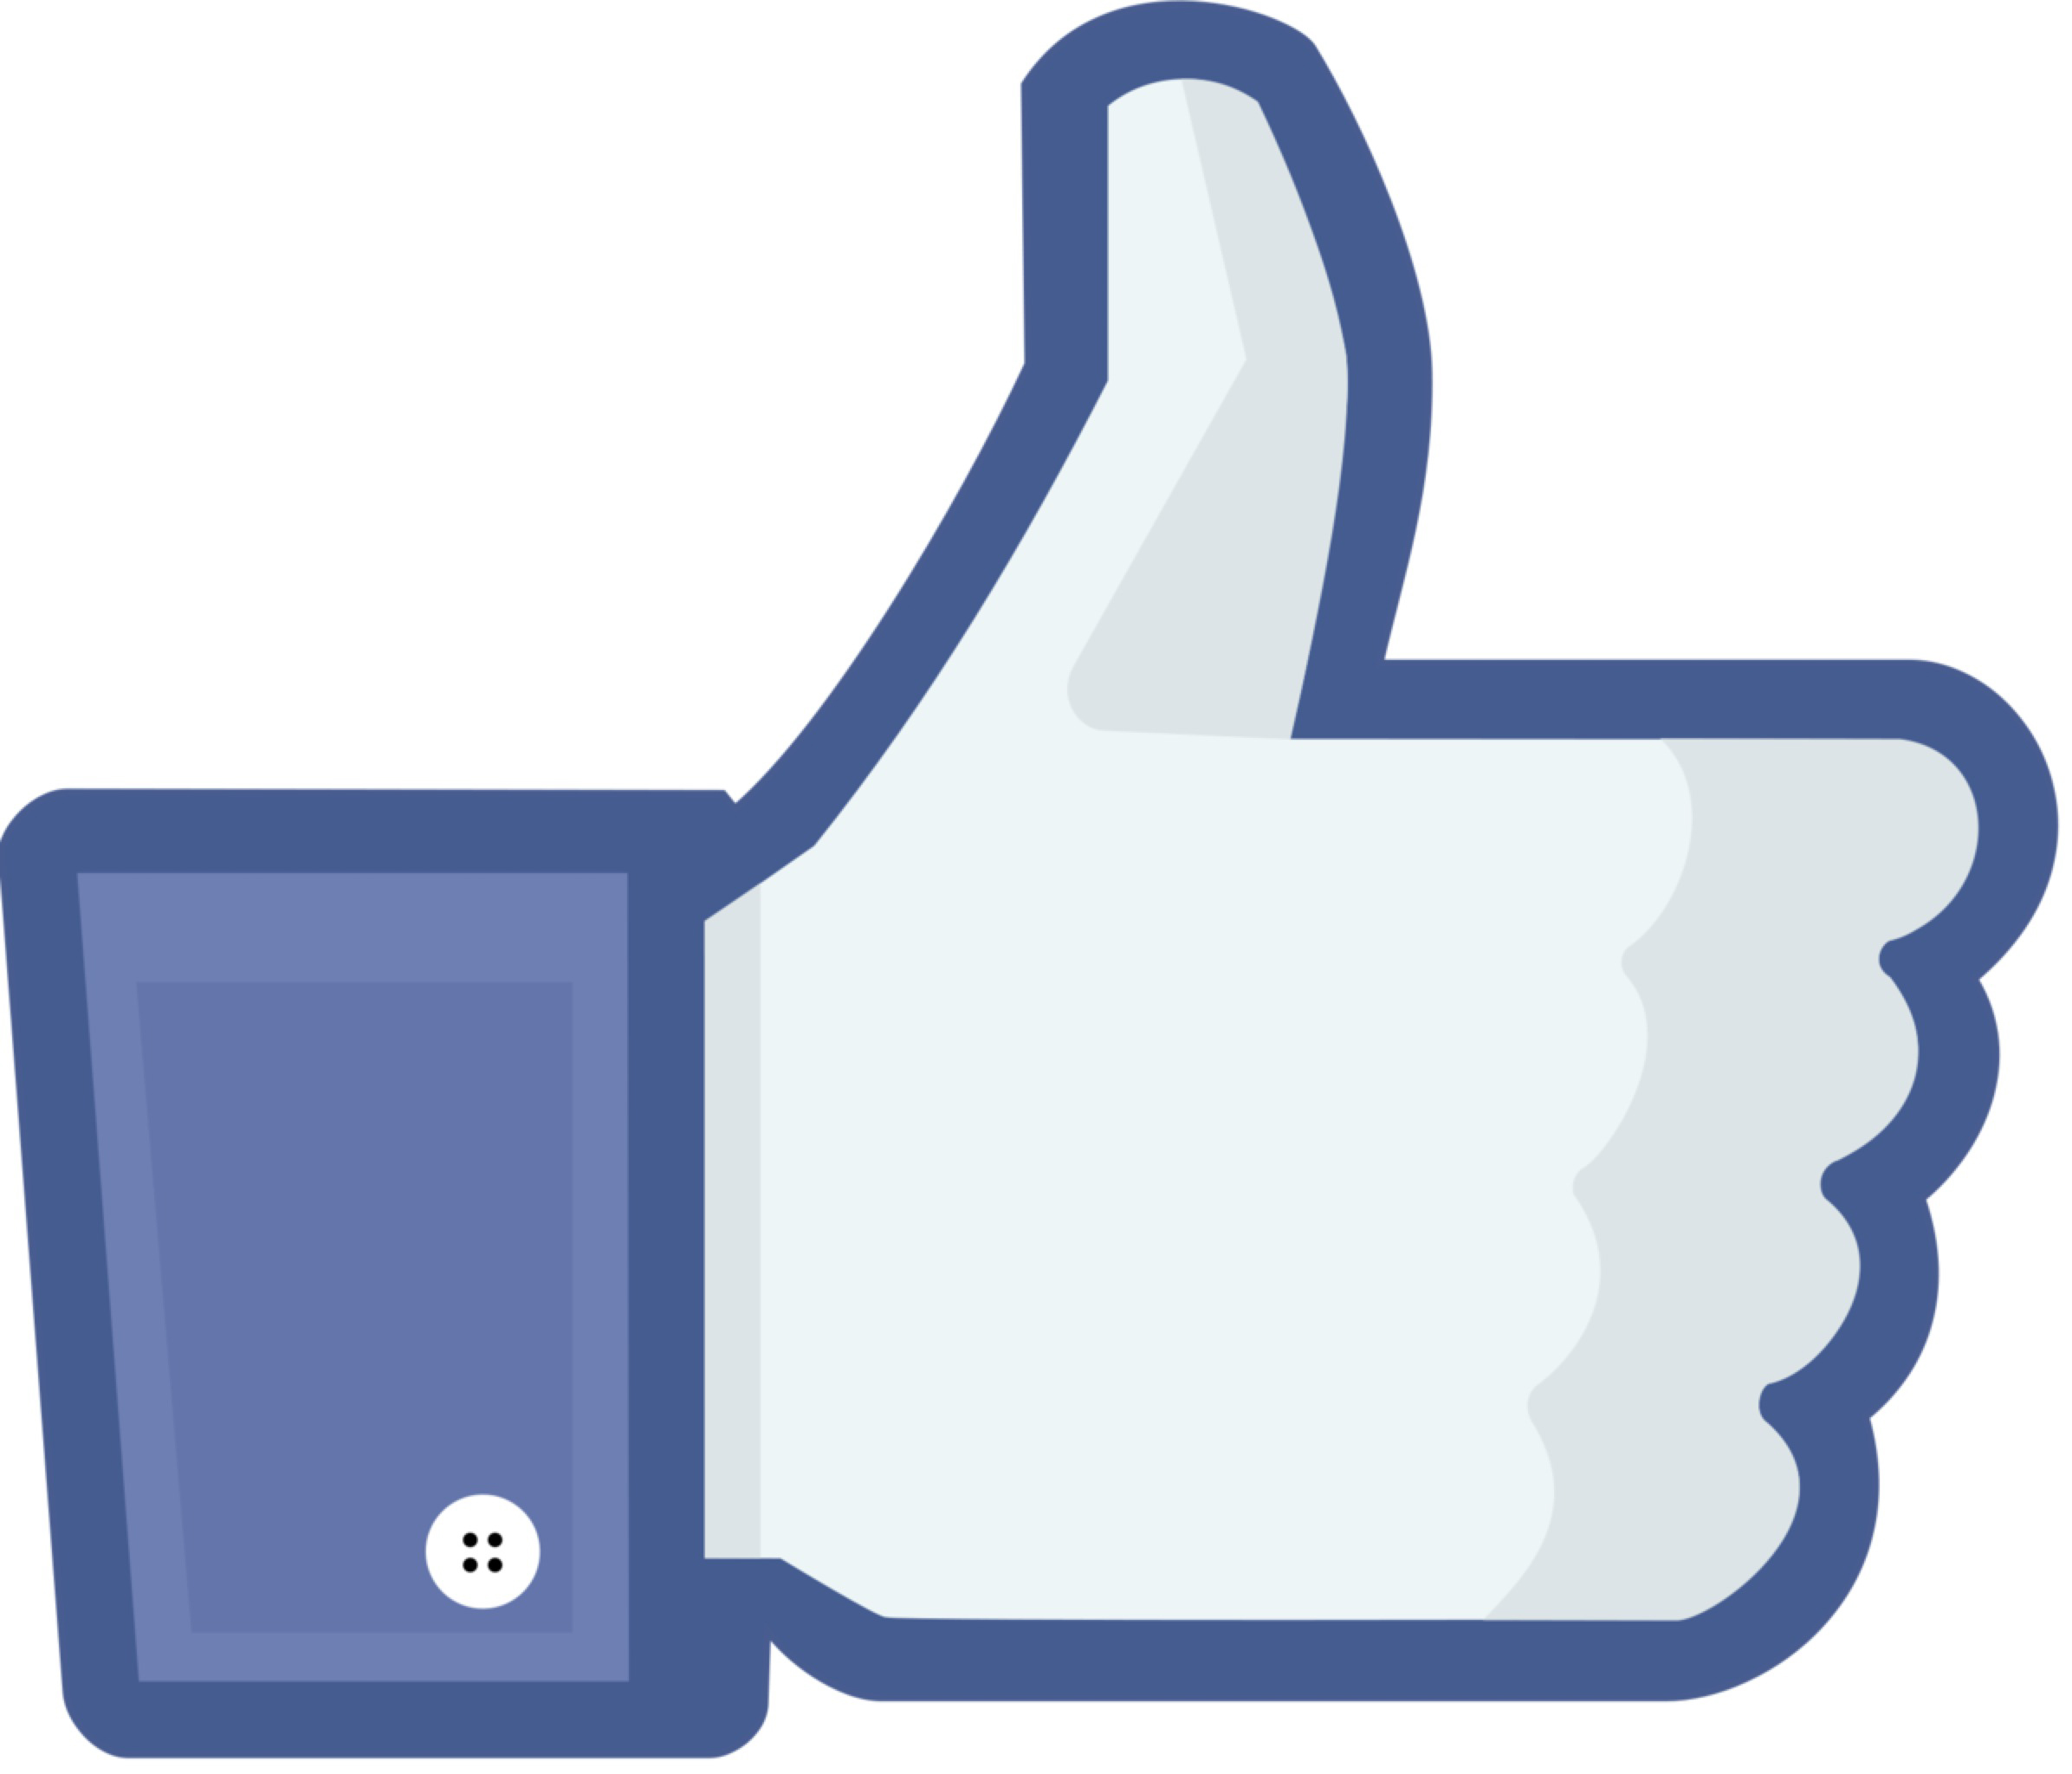 Facebook like clipart image.